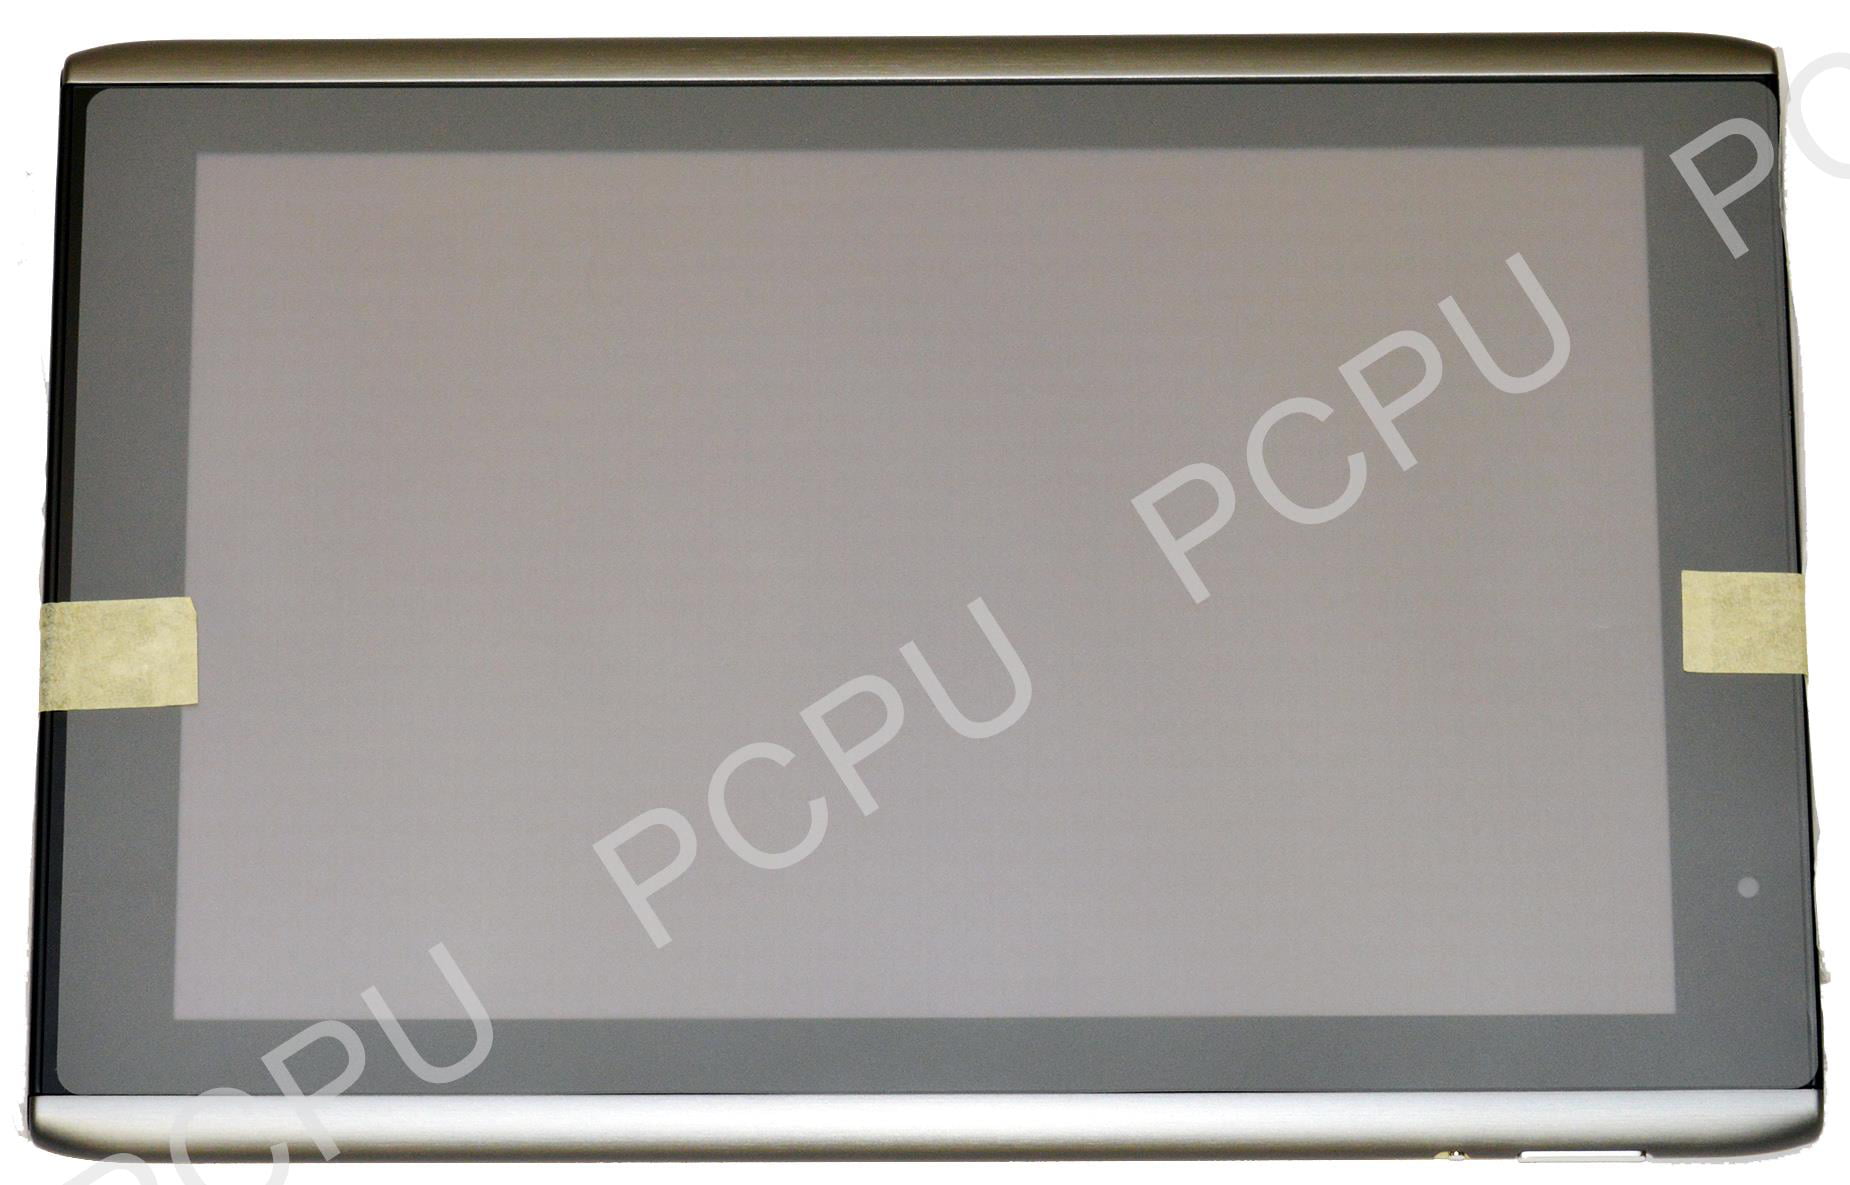 6M.H6002.001 Acer Iconia A500 10.1 Tablet LCD Assembly w/Digitizer New